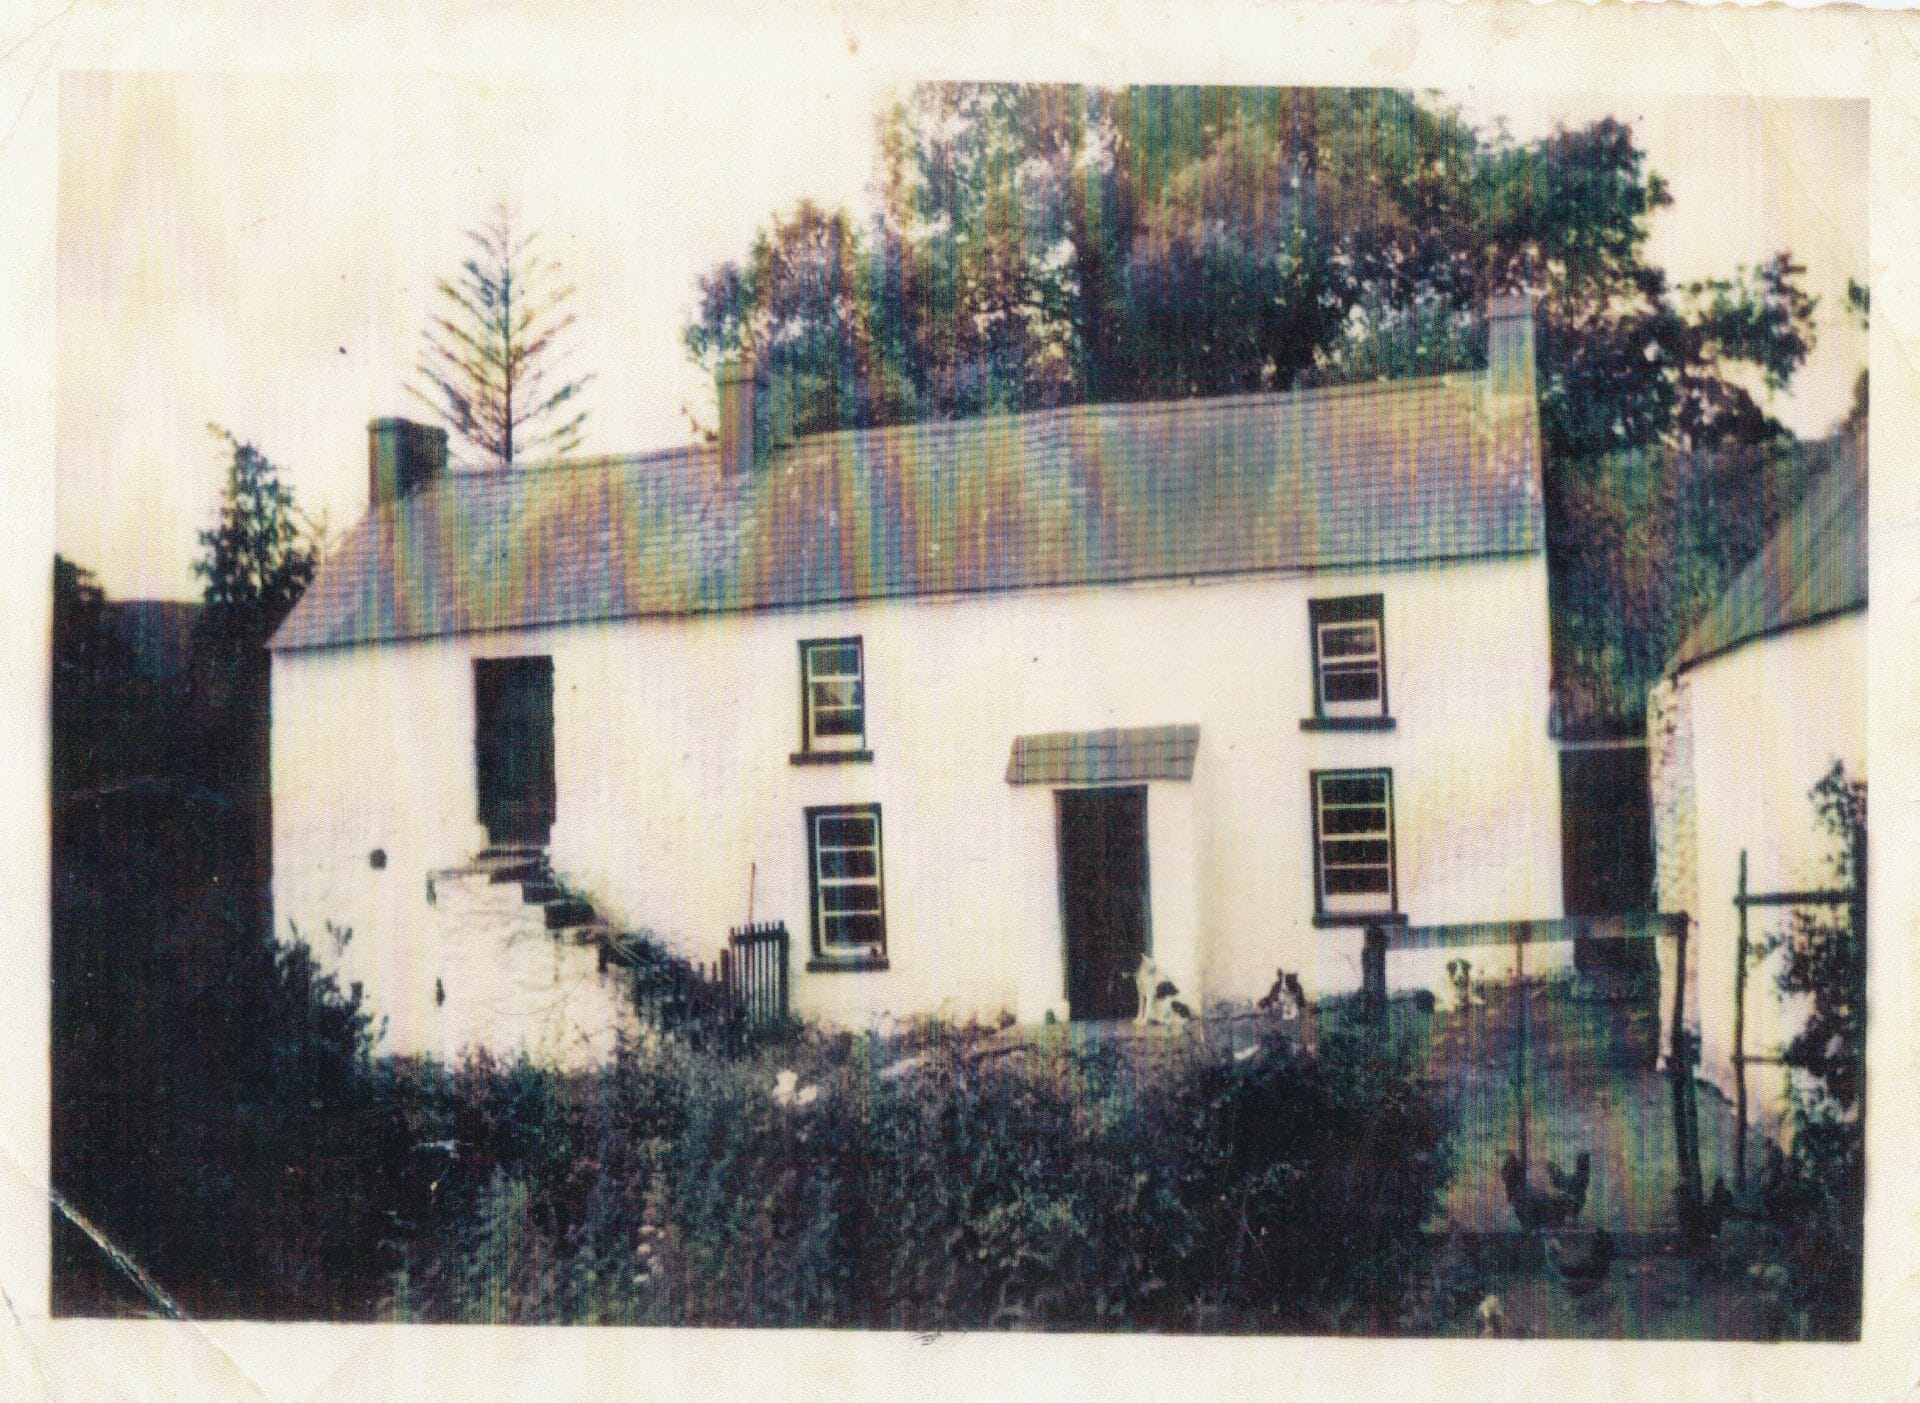 Pat Roddy`s two storey house